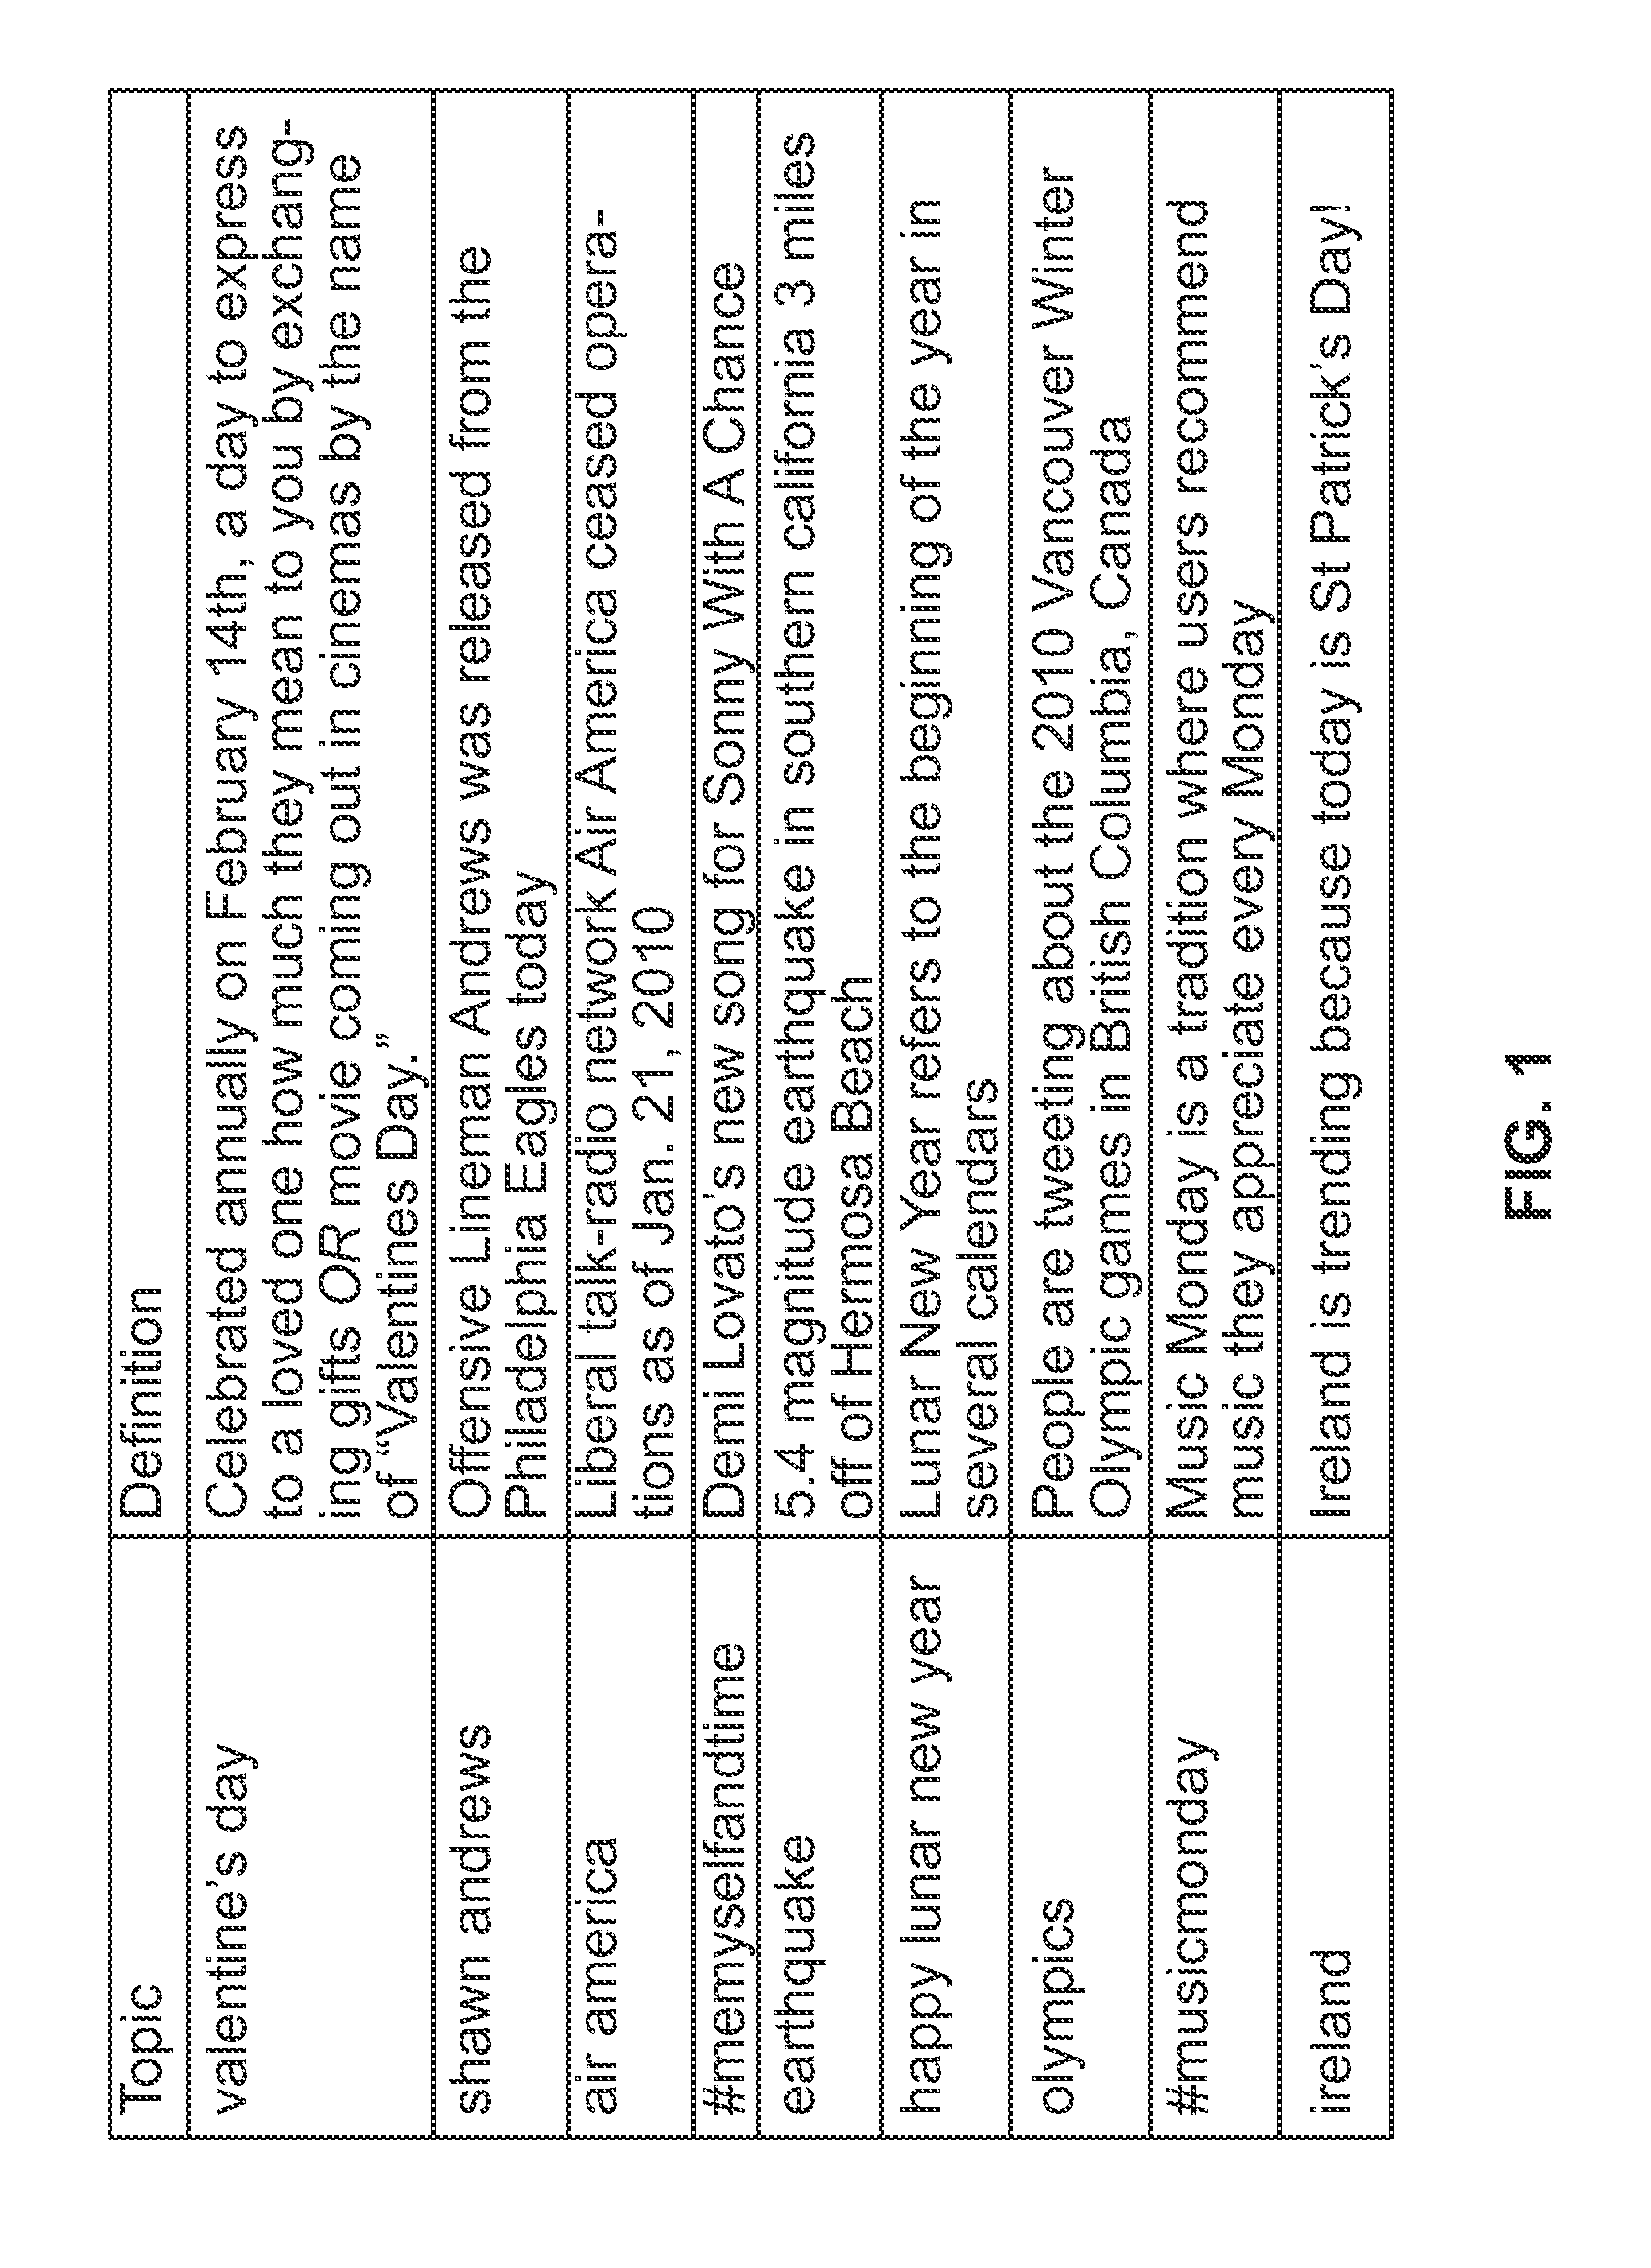 Methods And Systems For Analyzing Data Of An Online Social Network